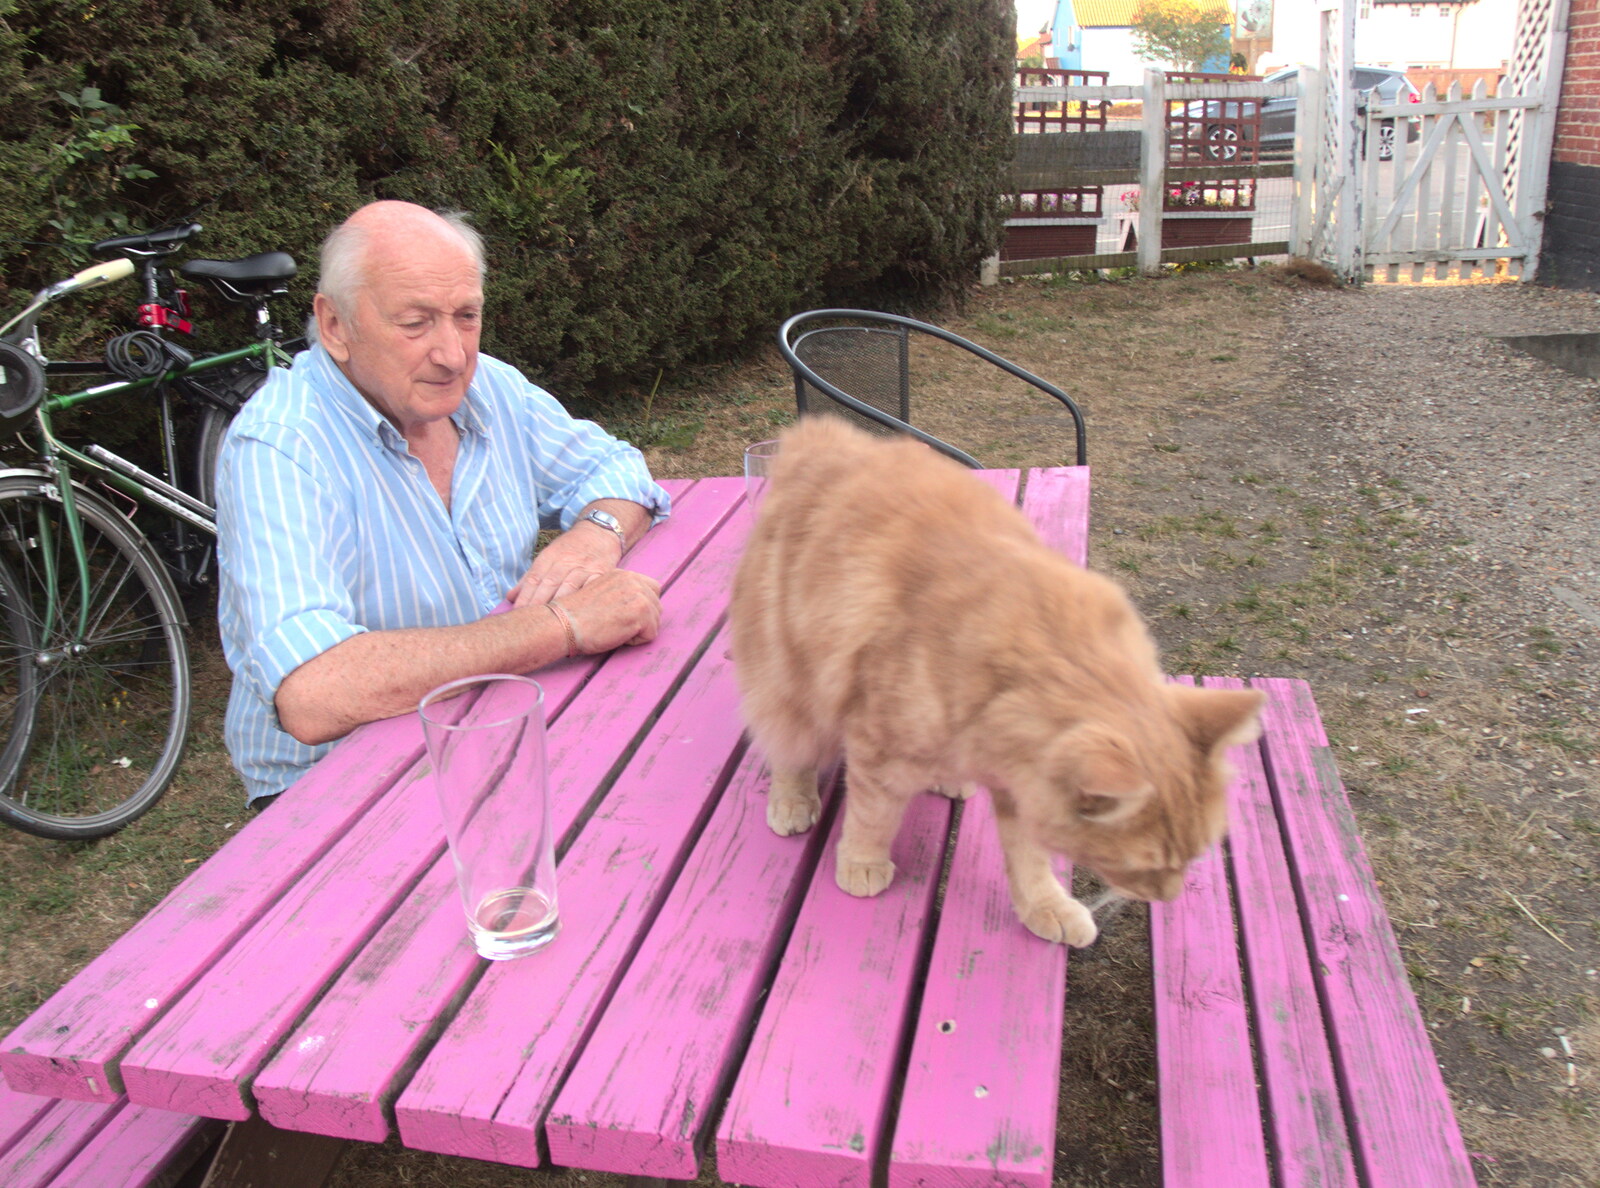 The ginger cat comes over for a stroke from Camping at Forest Park, Cromer, Norfolk - 12th August 2022